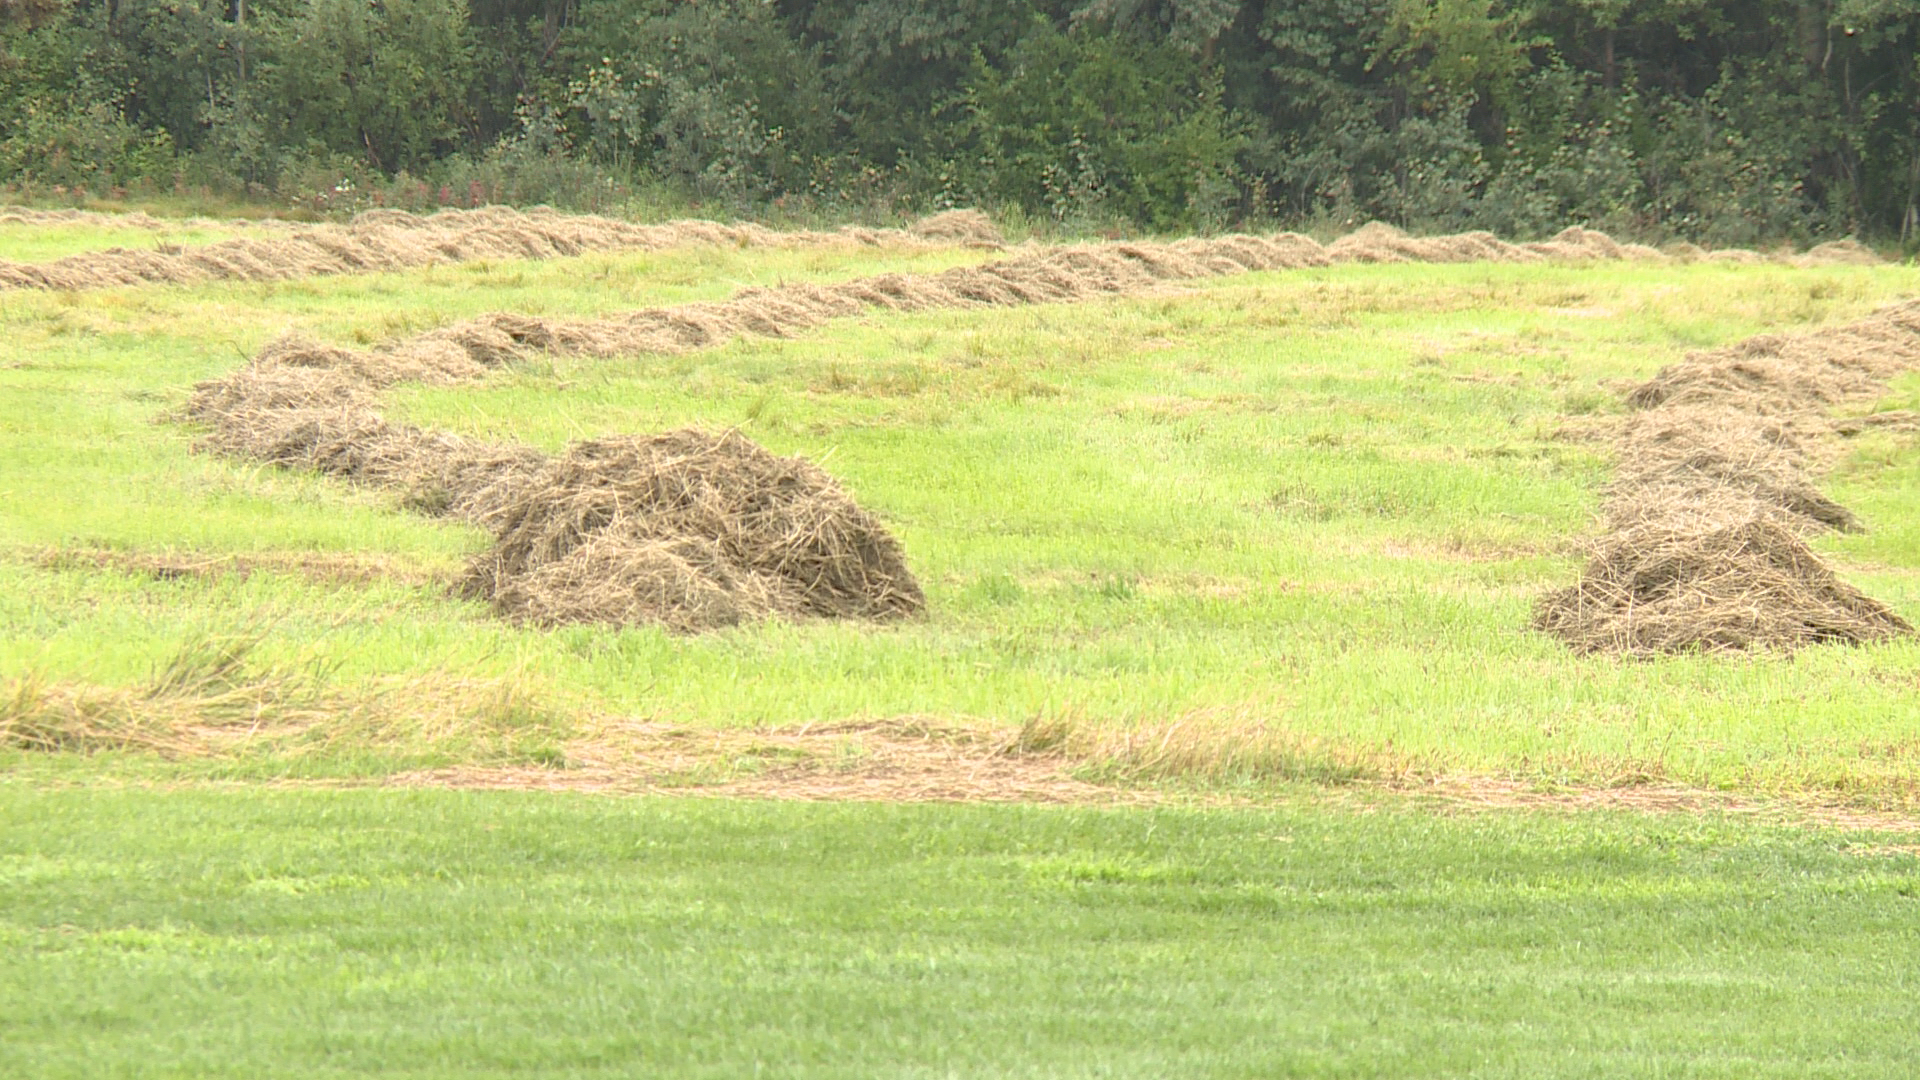 Dry summer leads to hay shortage for some farmers